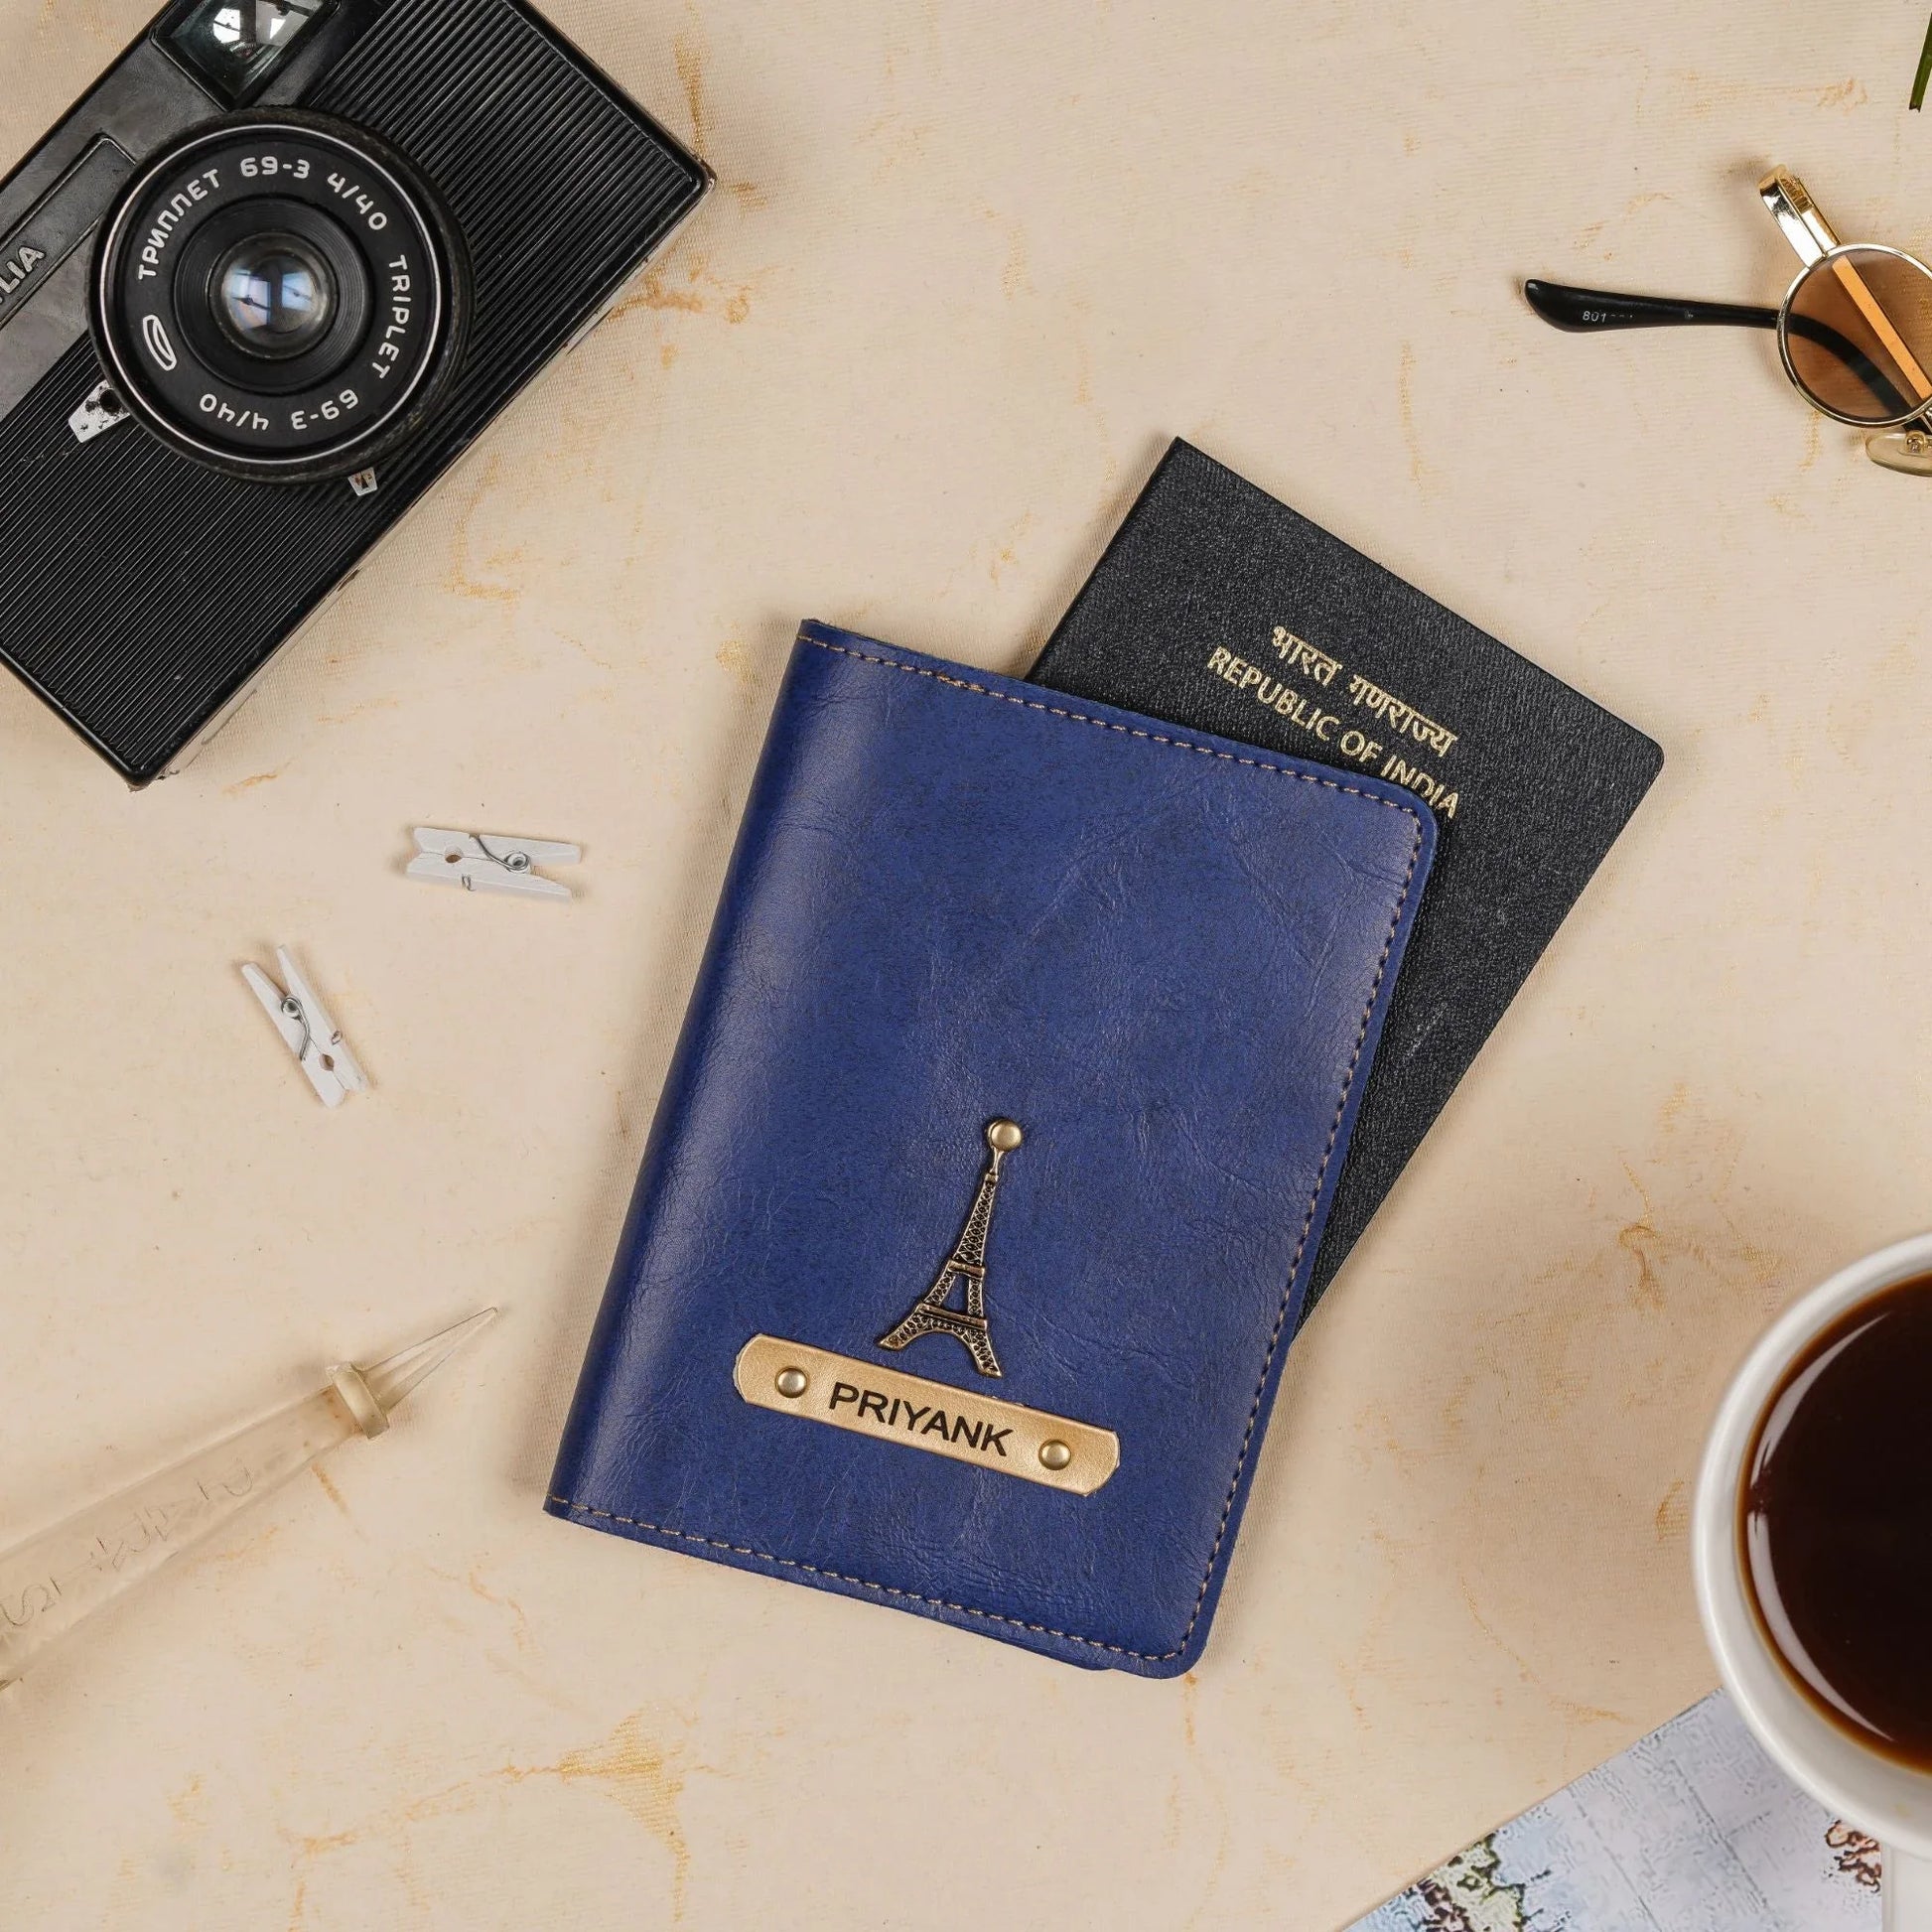 Travel in style with our customized passport cover! Made from high-quality materials and available in a variety of colors and styles, this cover can be personalized with your choice of initials, monogram or design.